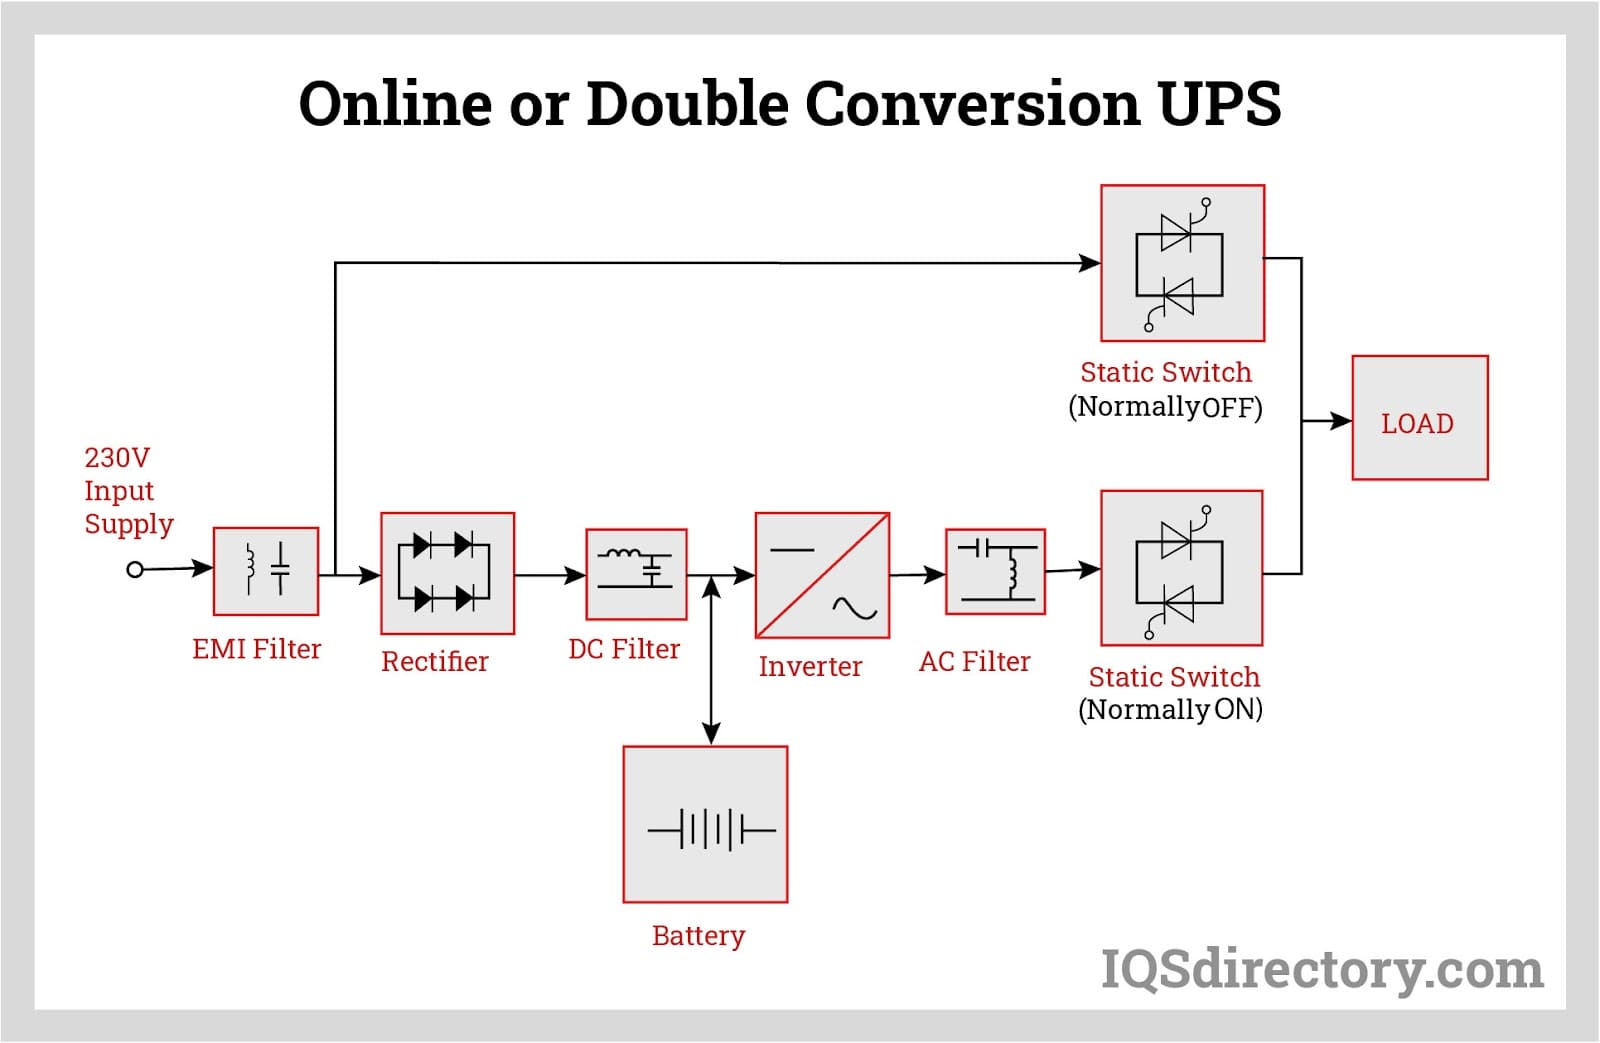 Online or Double Conversion UPS